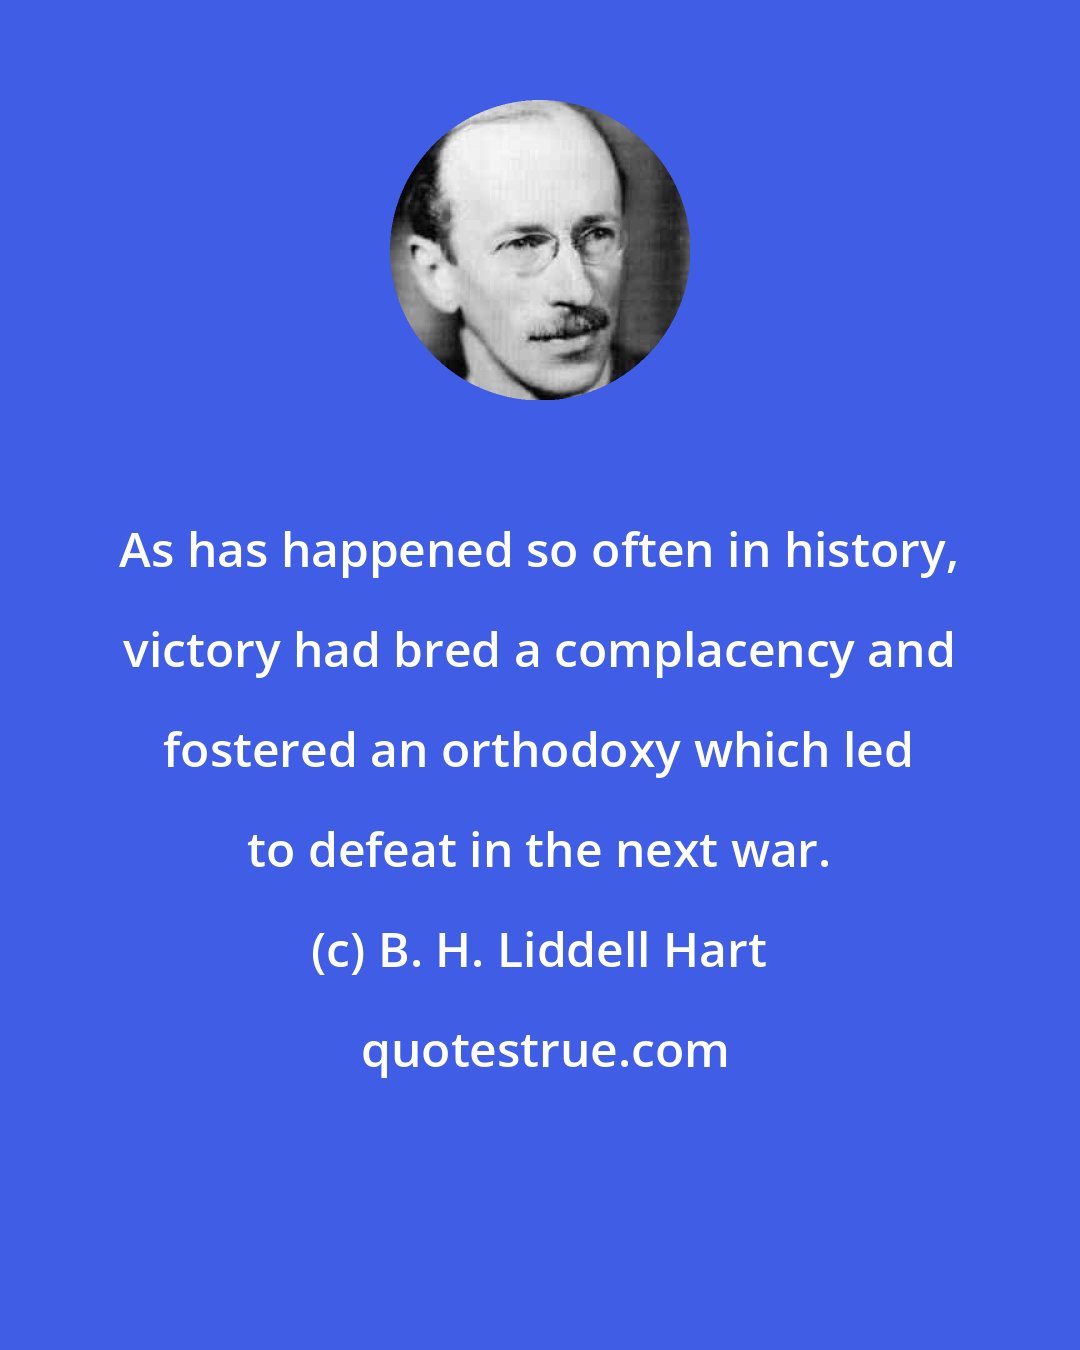 B. H. Liddell Hart: As has happened so often in history, victory had bred a complacency and fostered an orthodoxy which led to defeat in the next war.